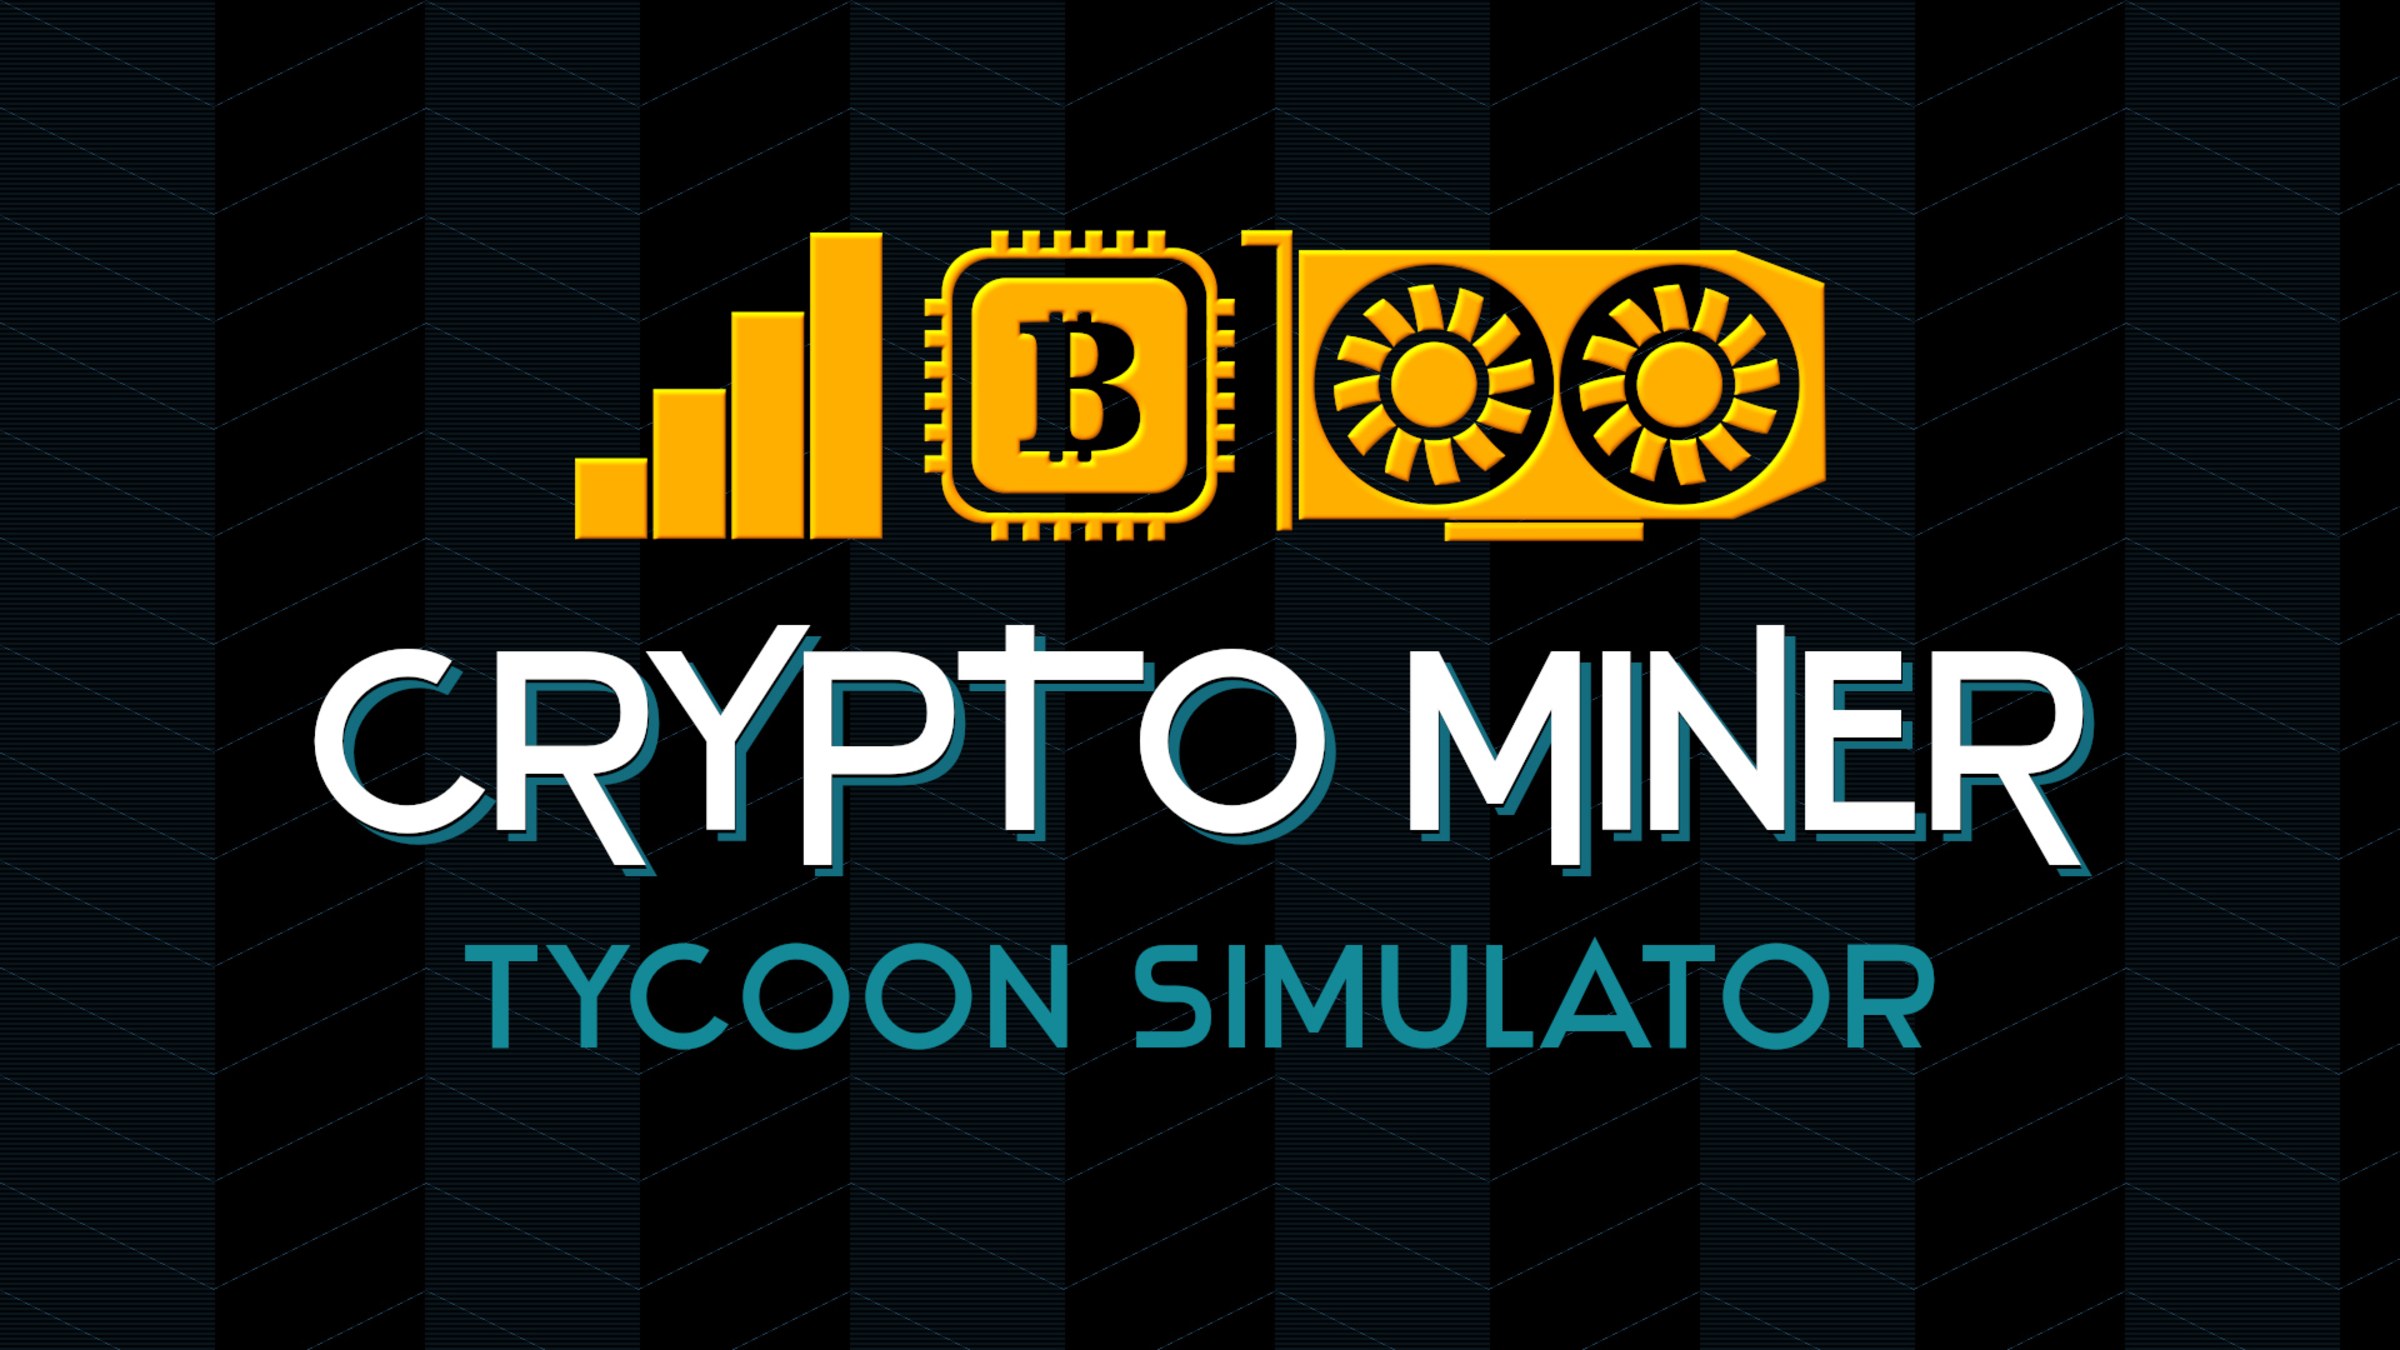 Crypto Miner Tycoon Simulator for Nintendo Switch - Nintendo Official Site